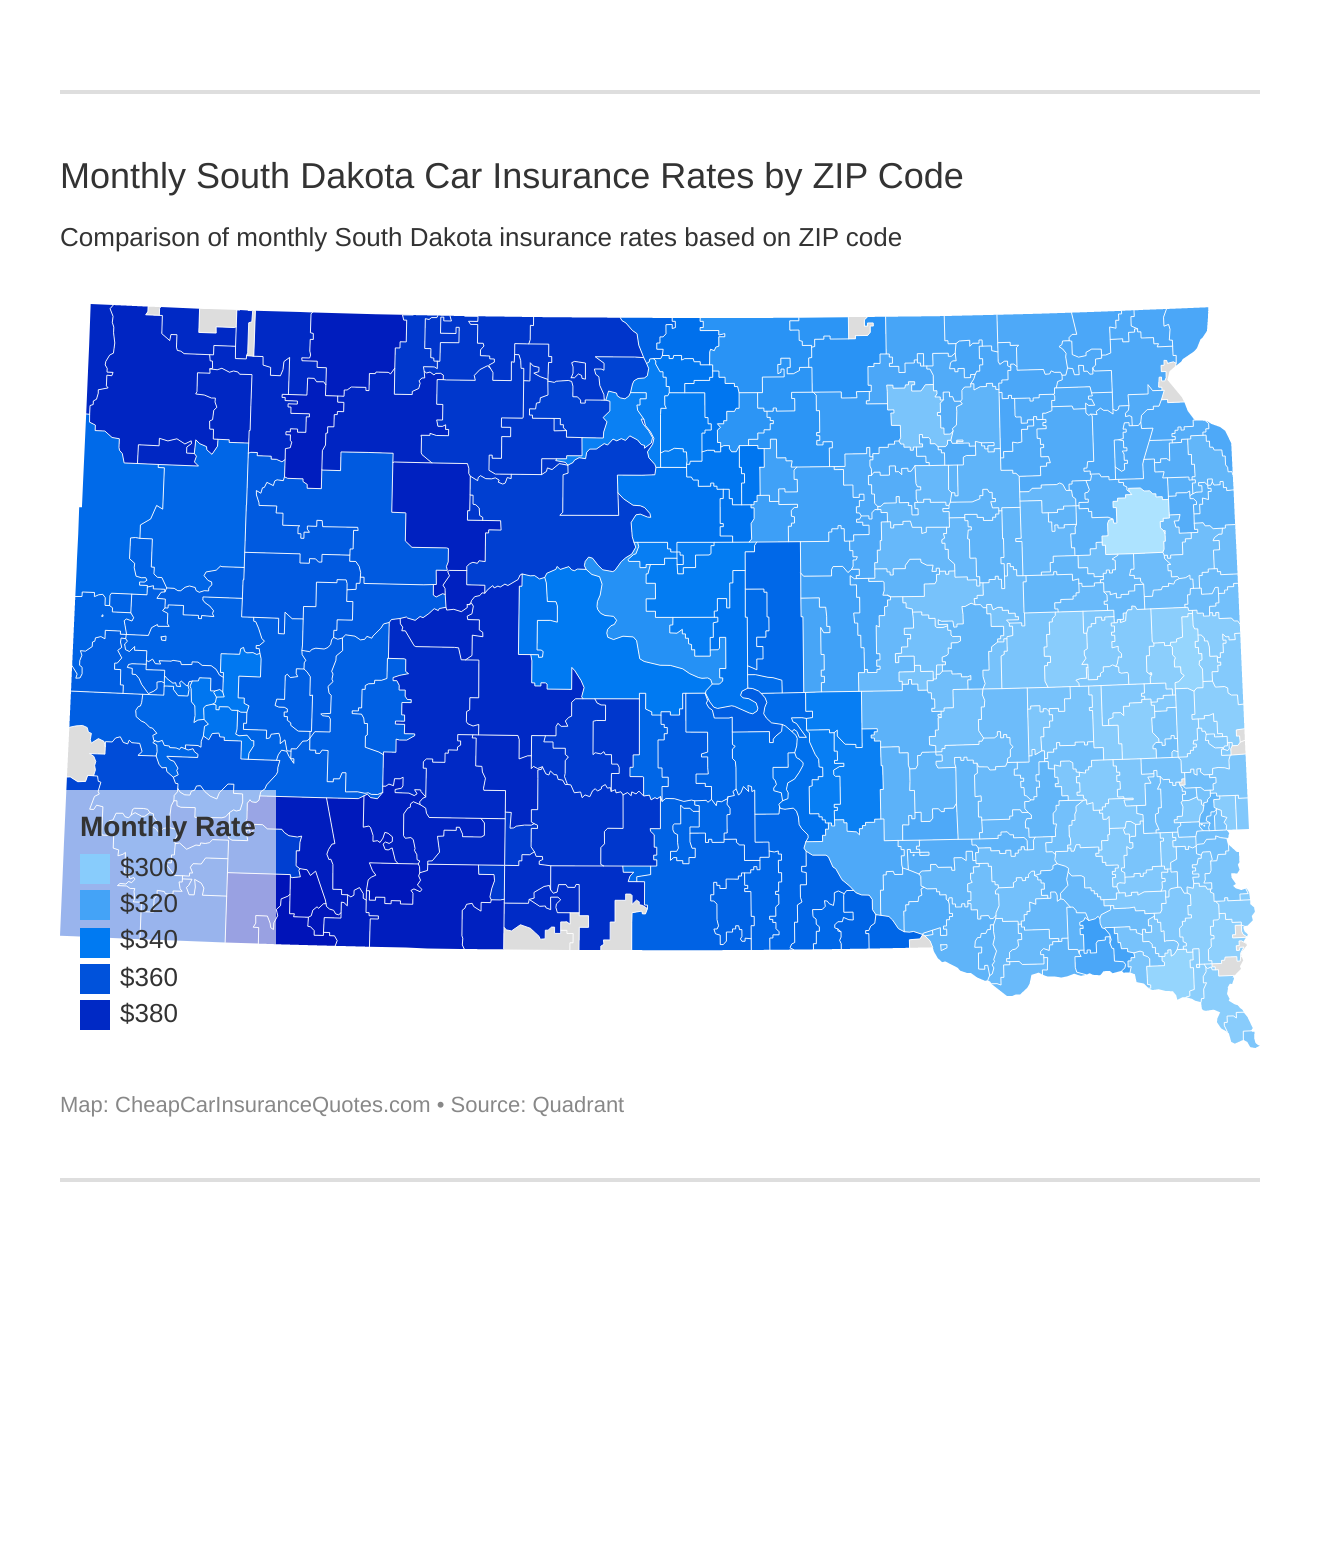 Monthly South Dakota Car Insurance Rates by ZIP Code